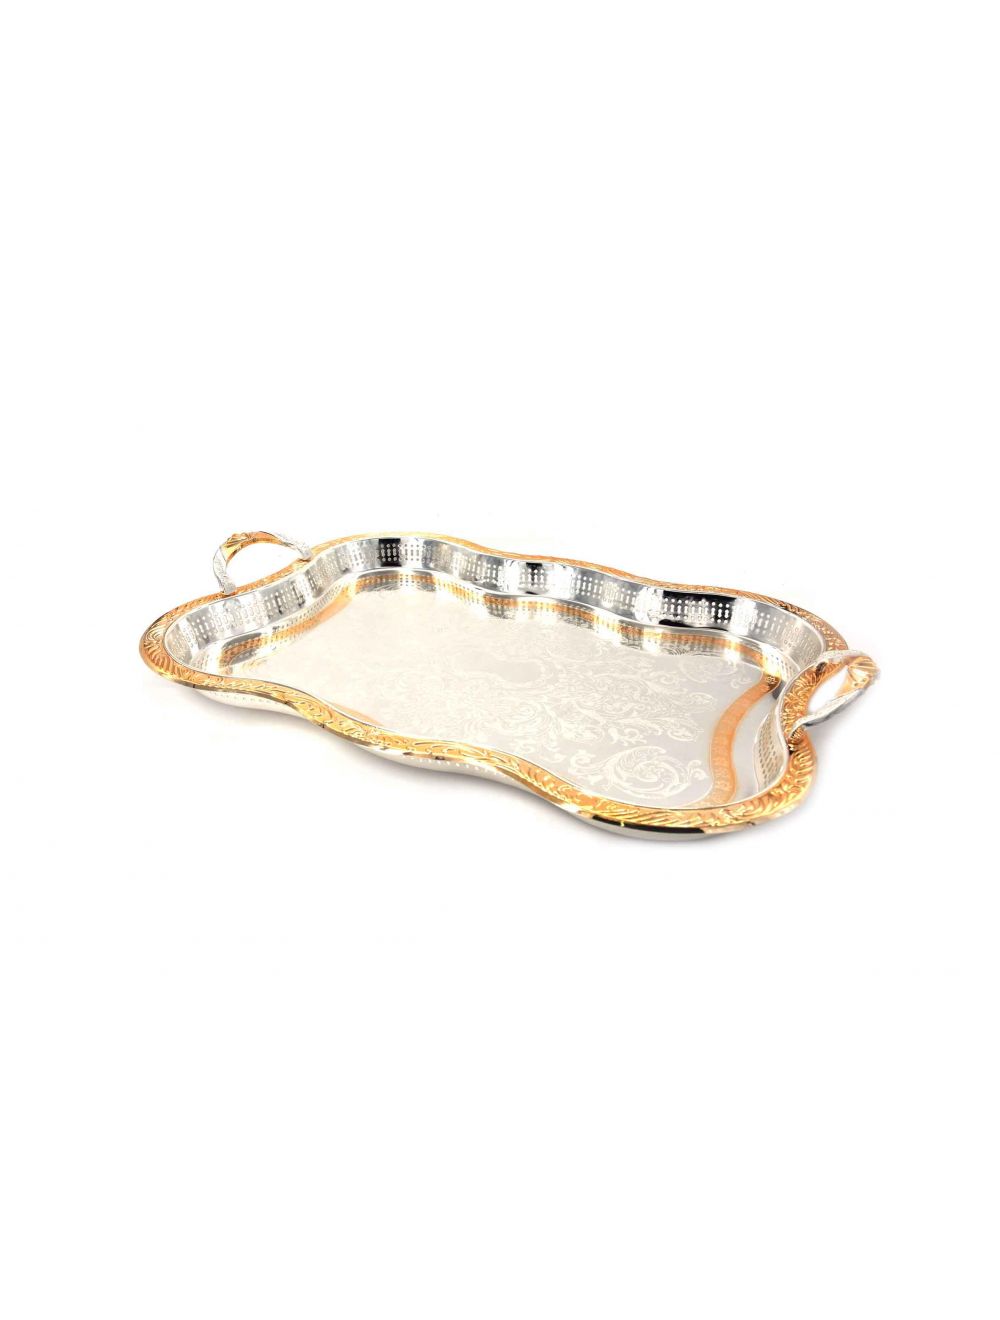 Acrylic Silver-Gold Serving Tray 